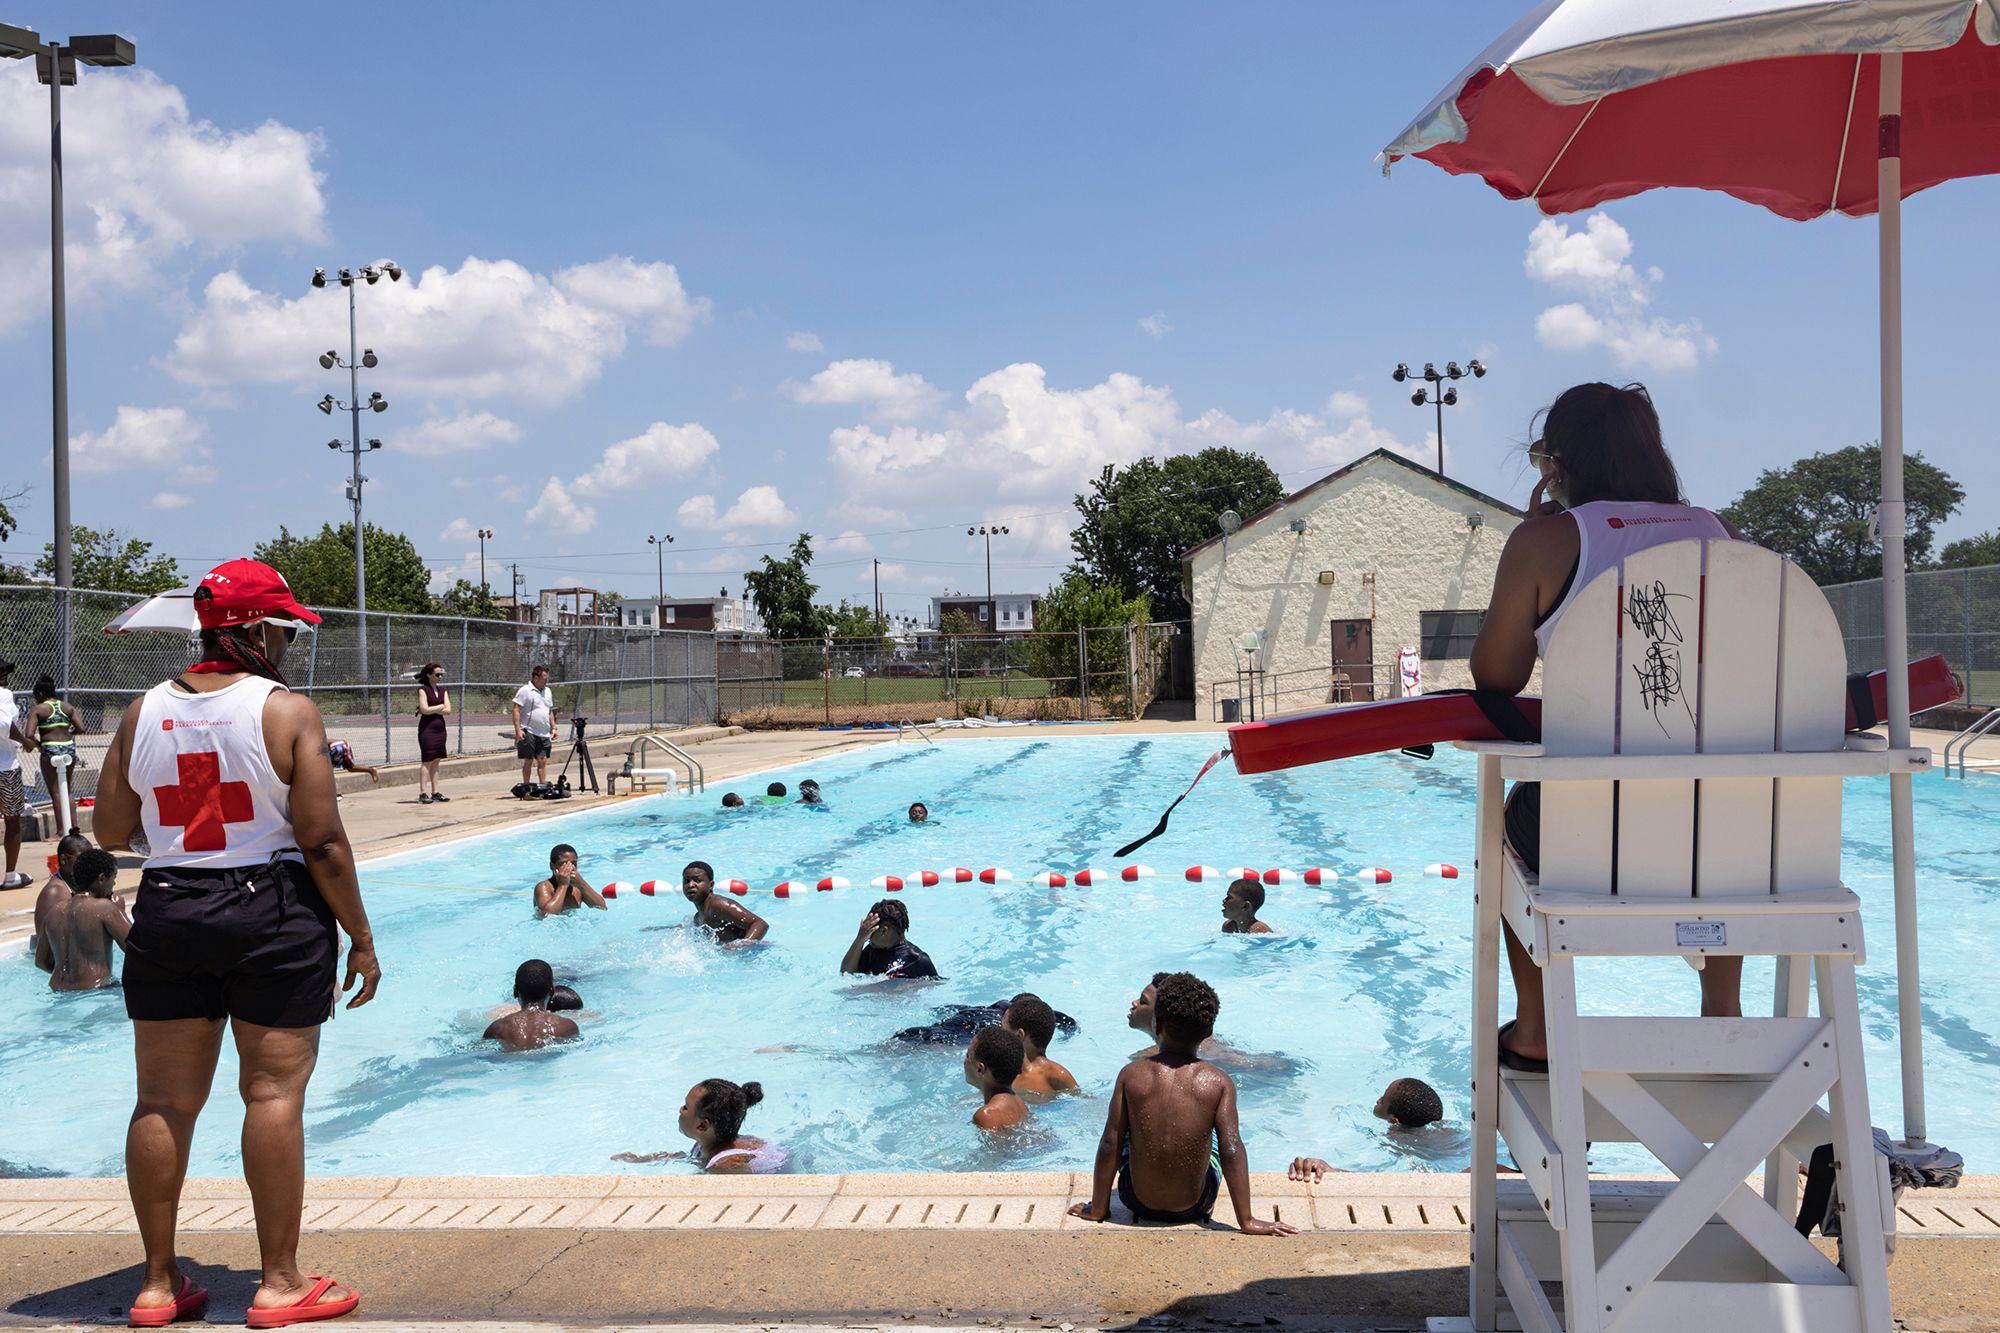 Public pools disappearing...